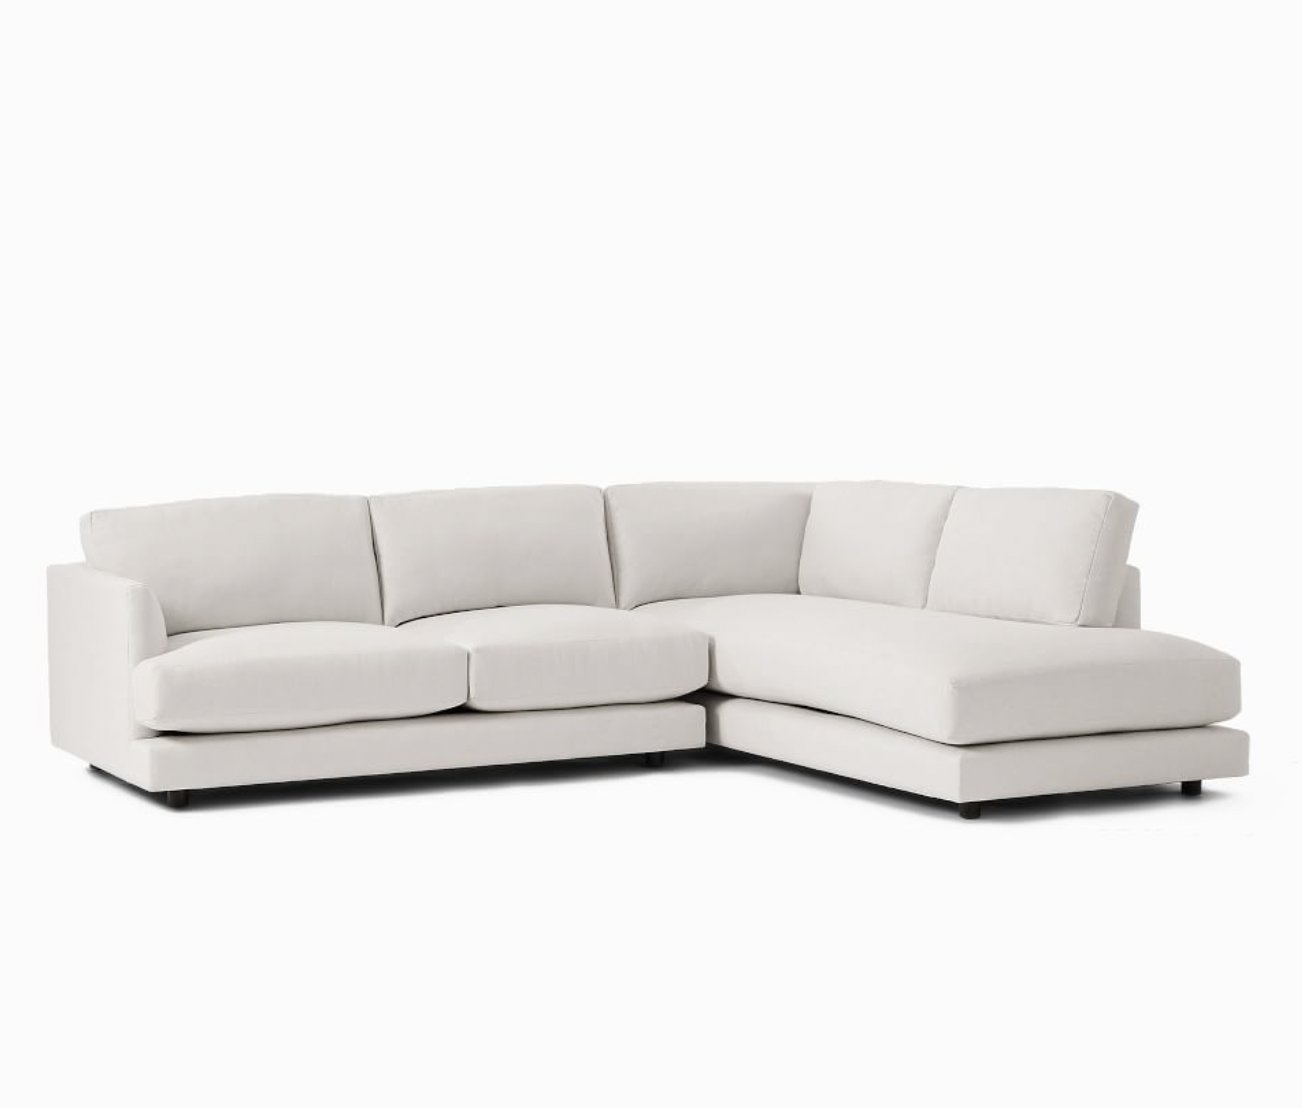 Haven 113" Right Multi Seat 2-Piece Bumper Chaise Sectional, Extra Deep Depth, Yarn Dyed Linen Weave, Alabaster - Image 0